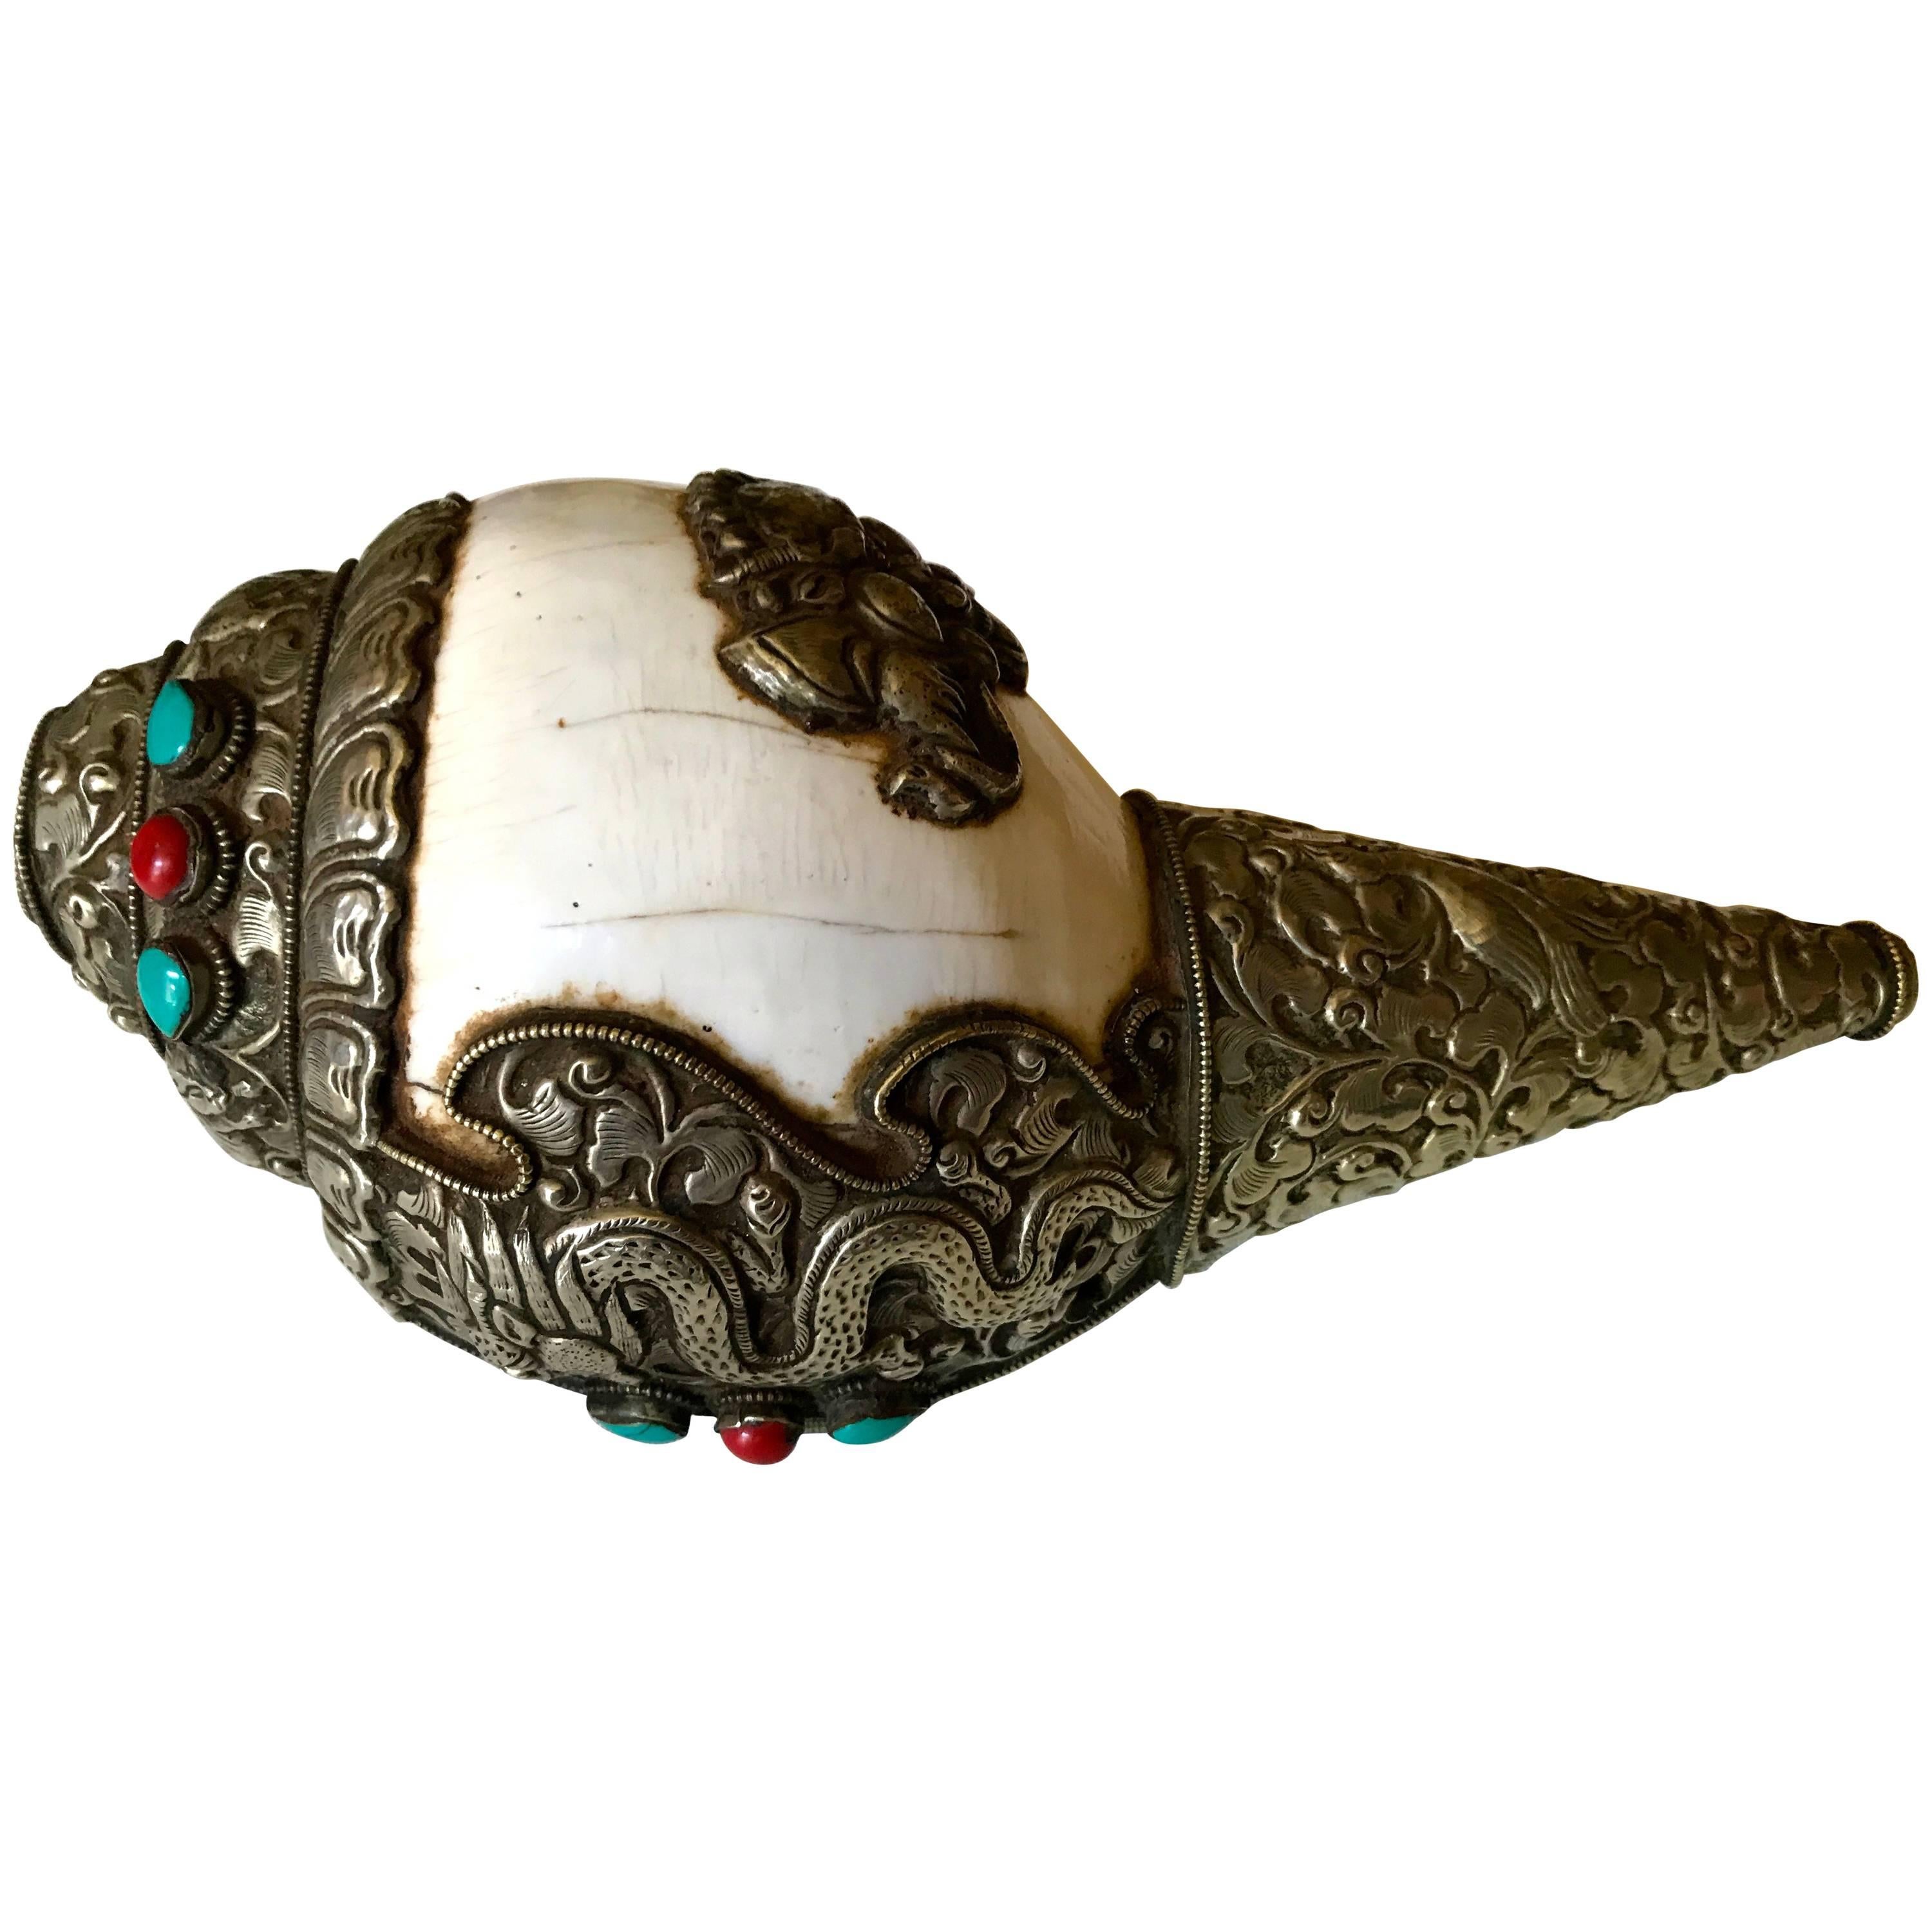 Tibetan Ritual Conch Shell with Silver and Stones For Sale